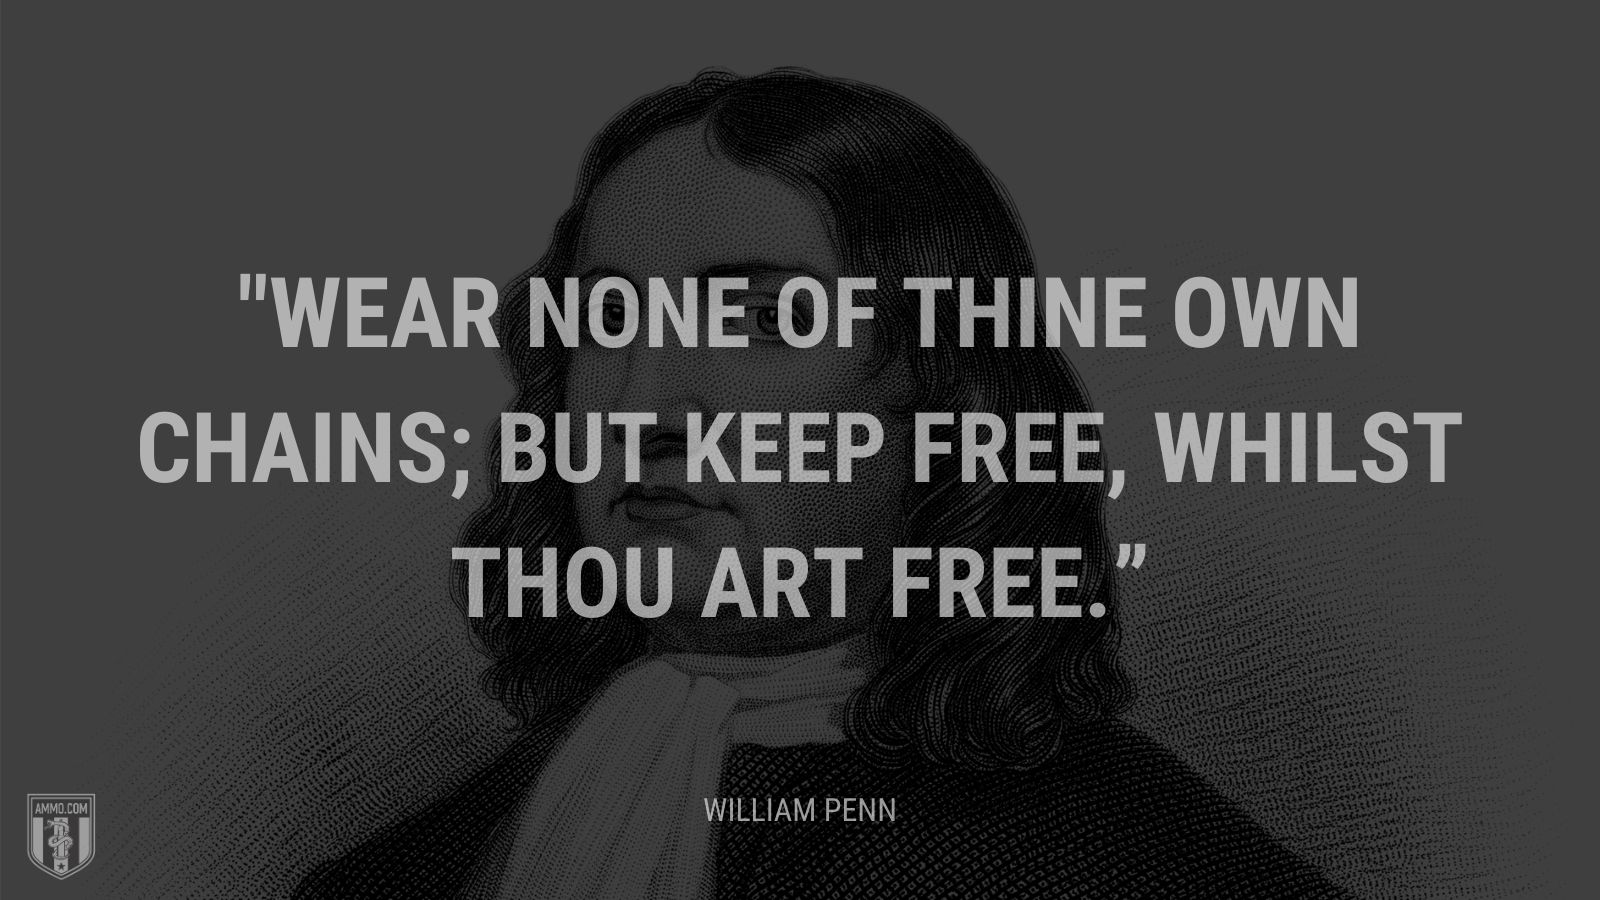 “Wear none of thine own chains; but keep free, whilst thou art free.” - William Penn